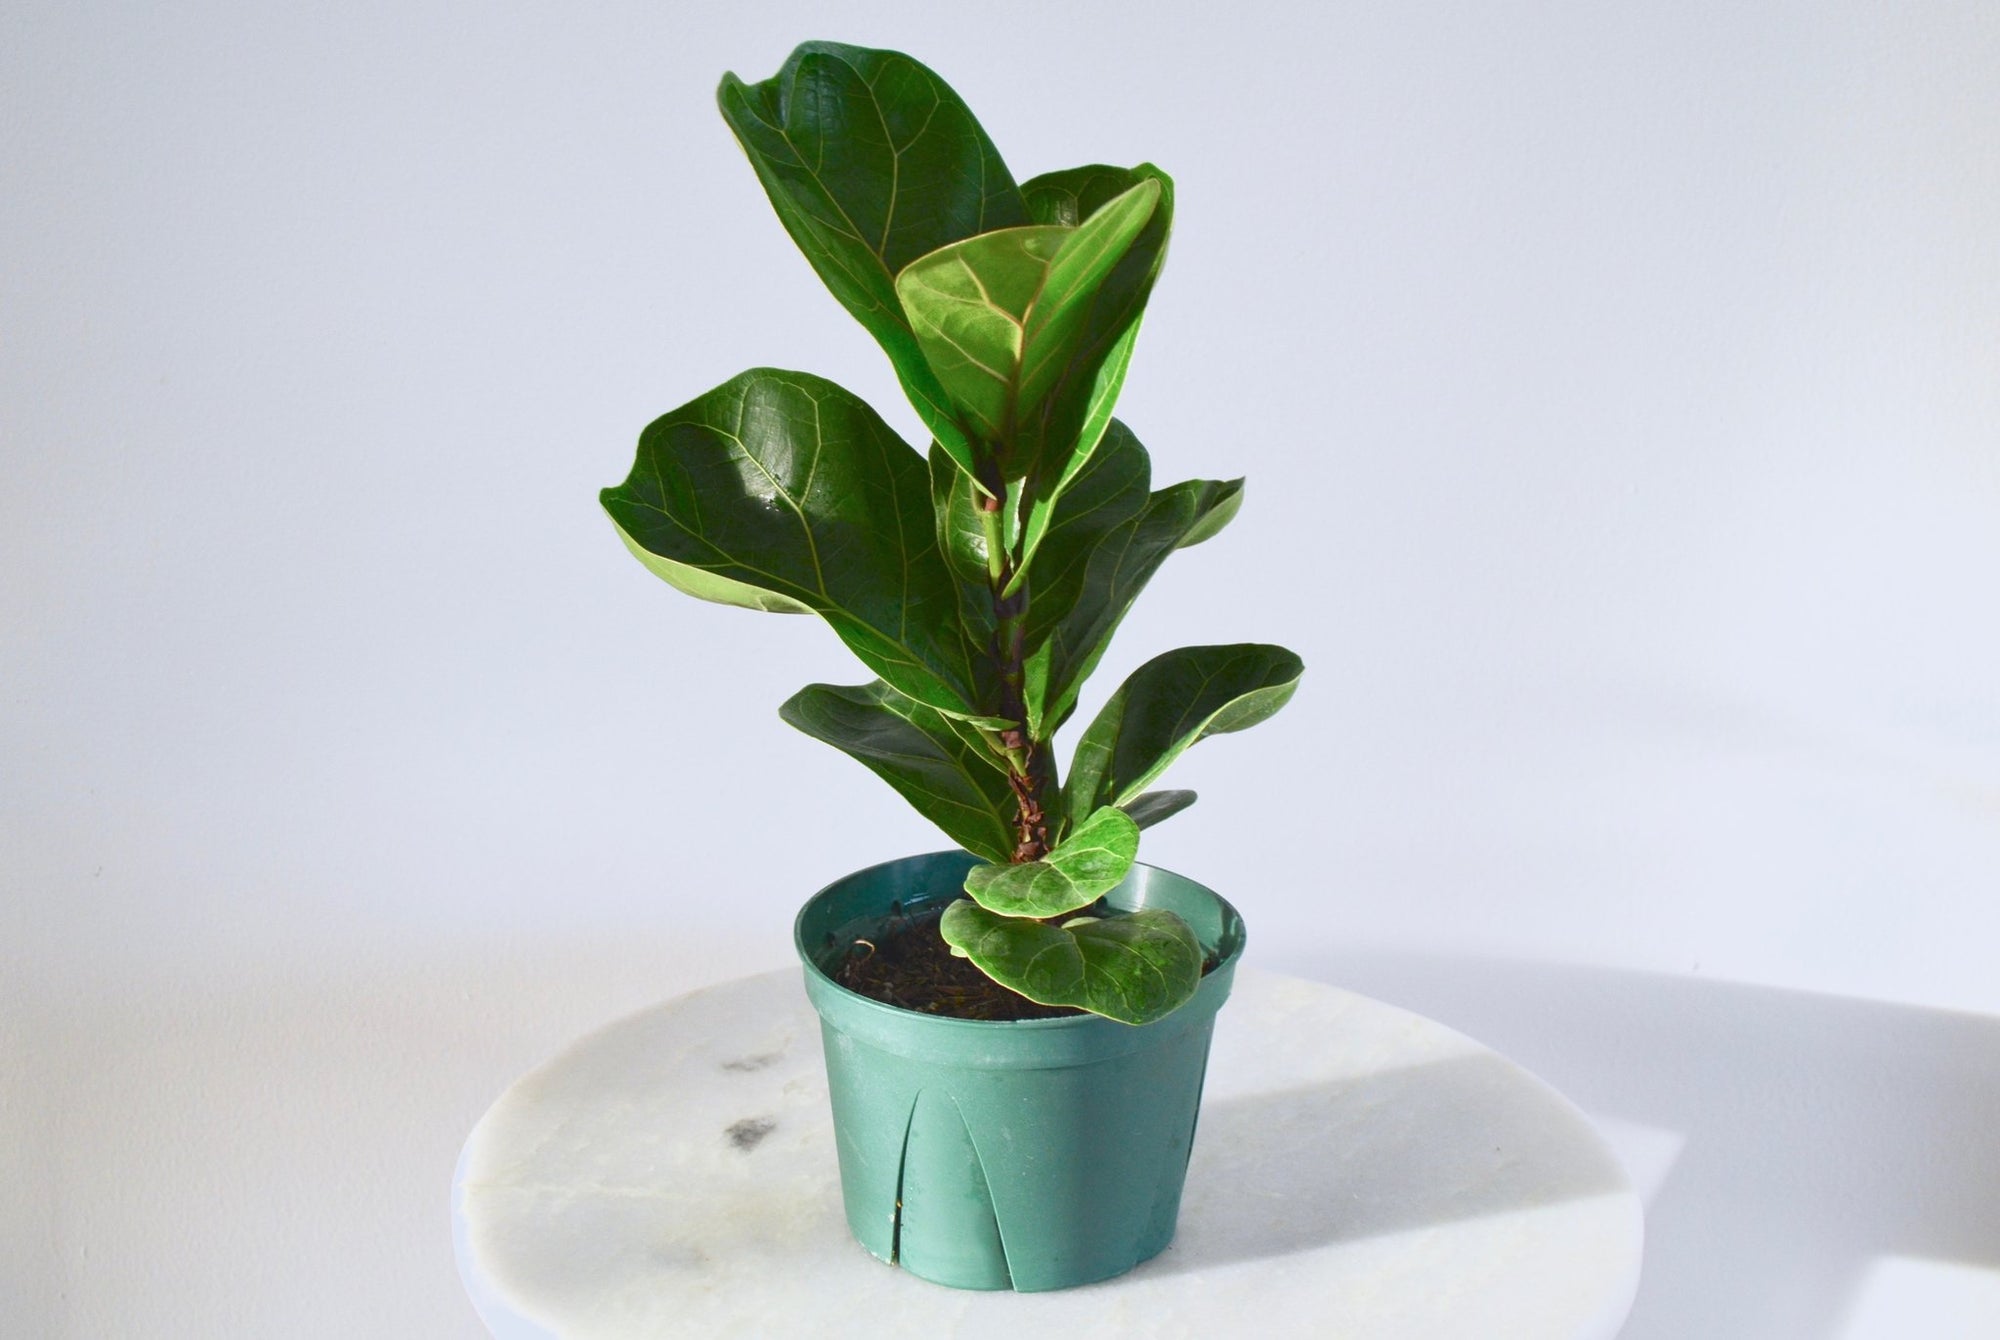 A white background with a white table top at the bottom of the image. There is a plant with dark green glossy longer rectangular shaped leaves with rounded edges. The plant is potted in a light blue pot.